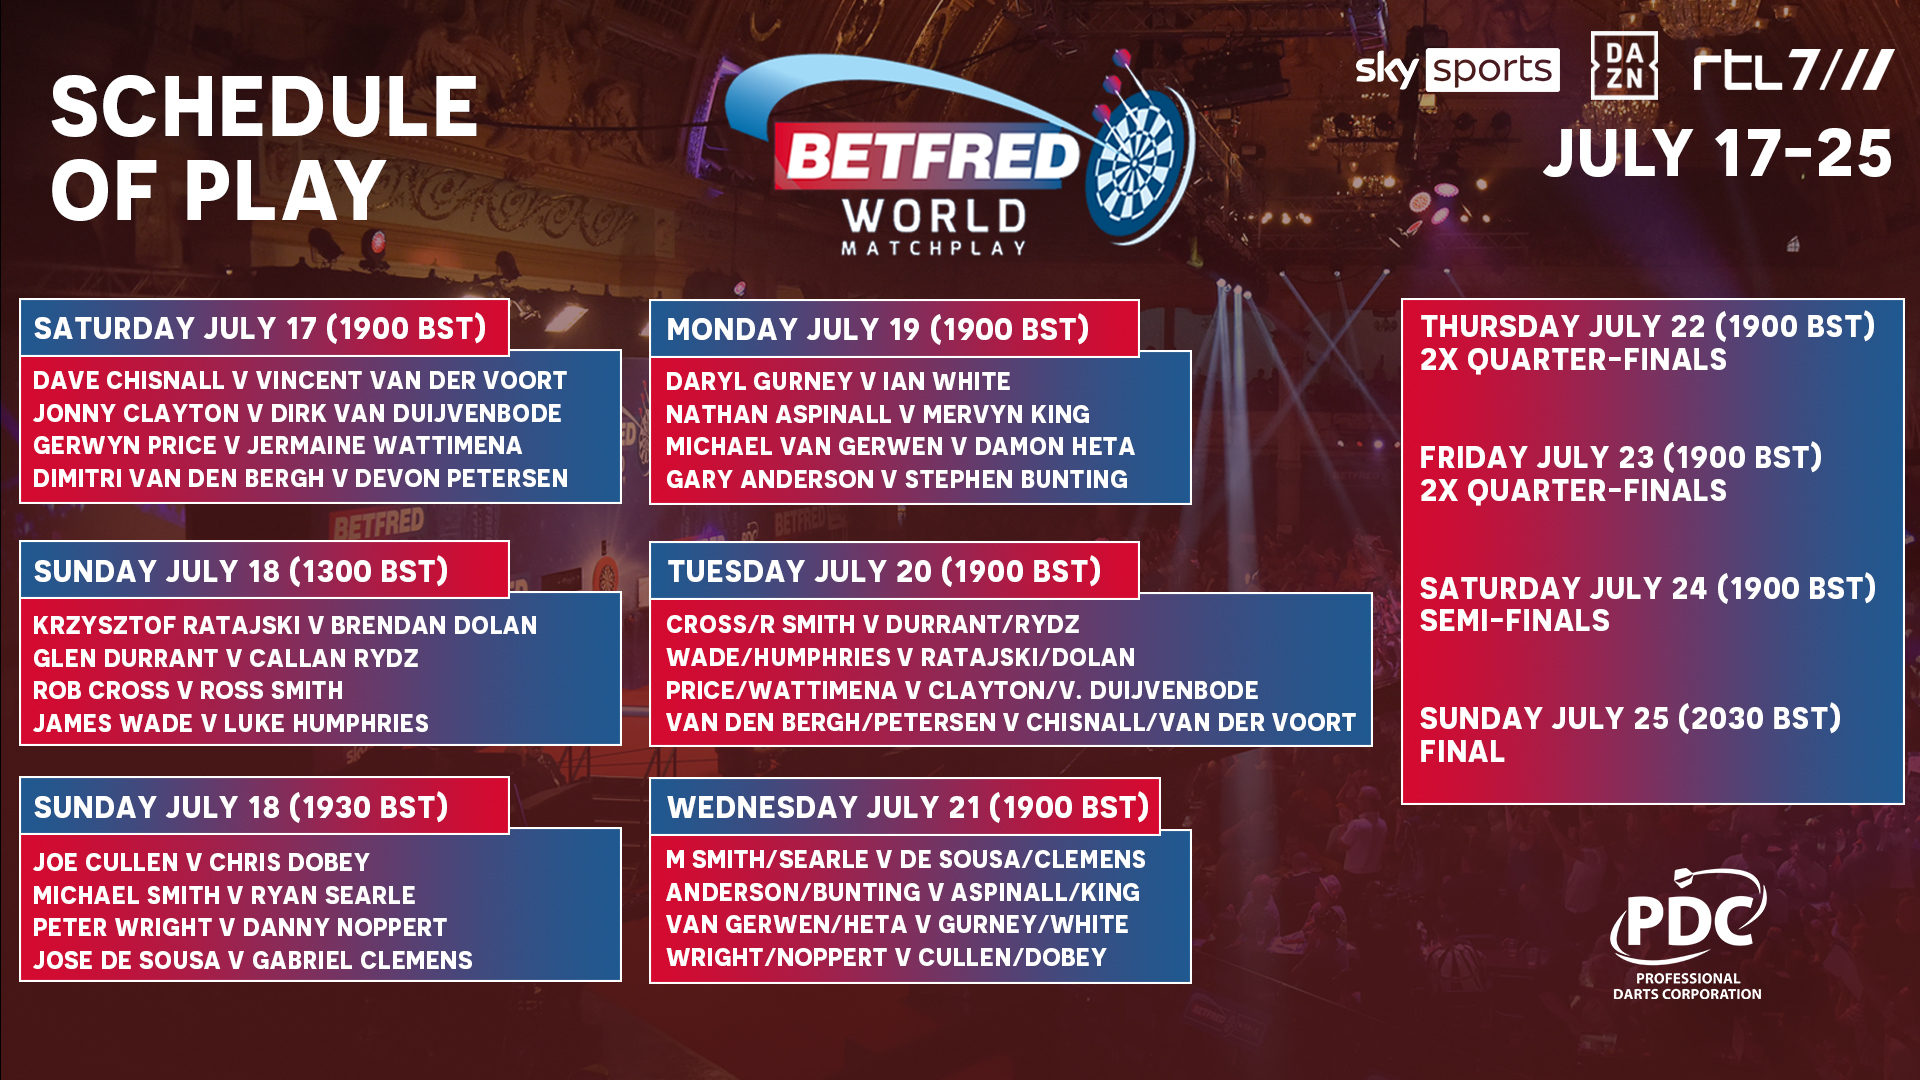 World Matchplay Schedule of Play